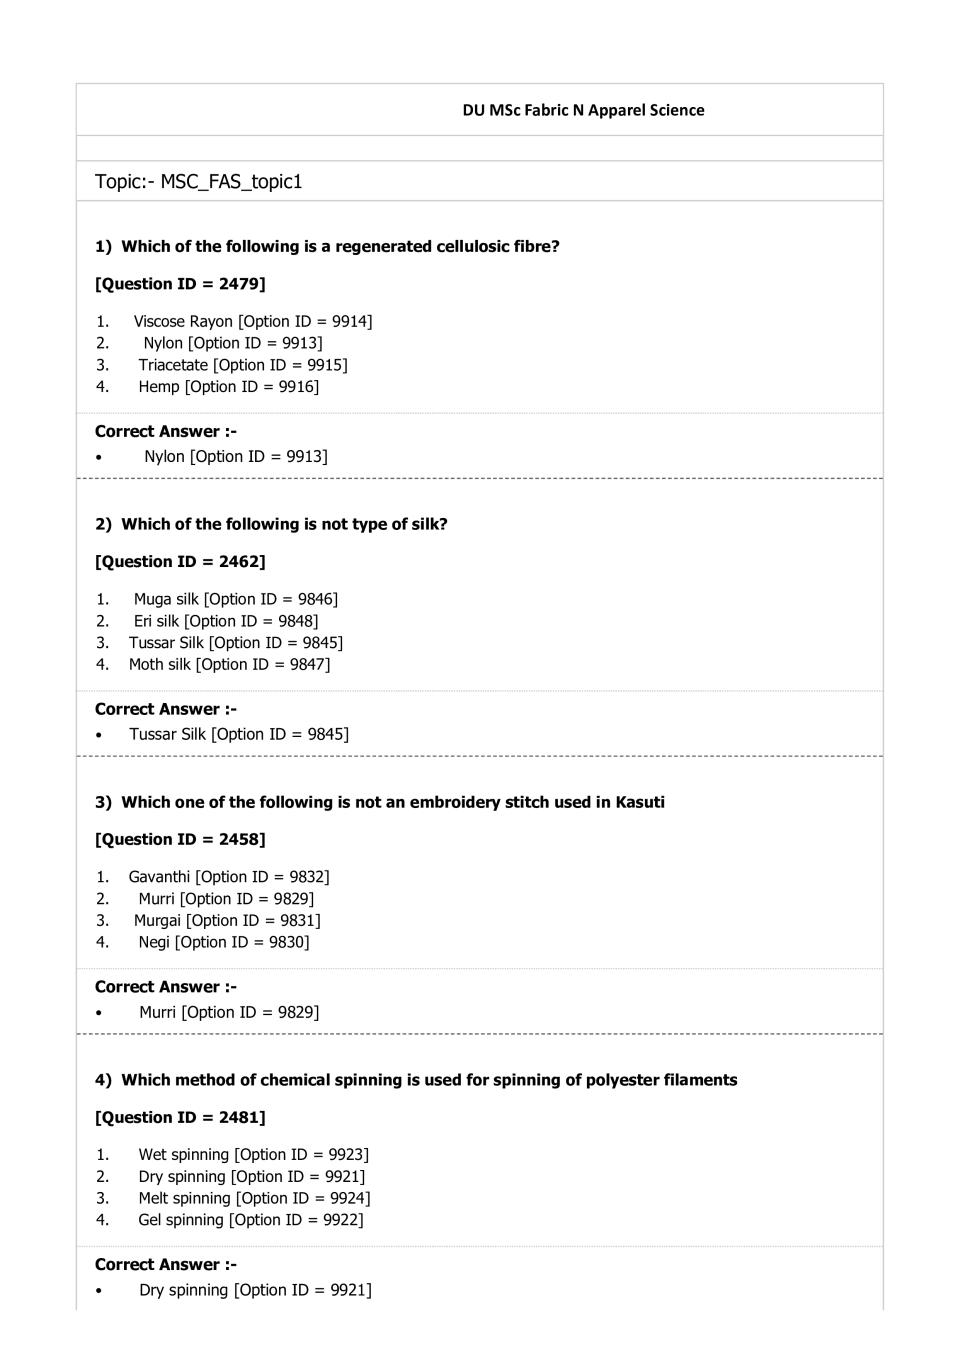 DUET Question Paper 2019 for M.Sc Fabric & Apparel Science - Page 1